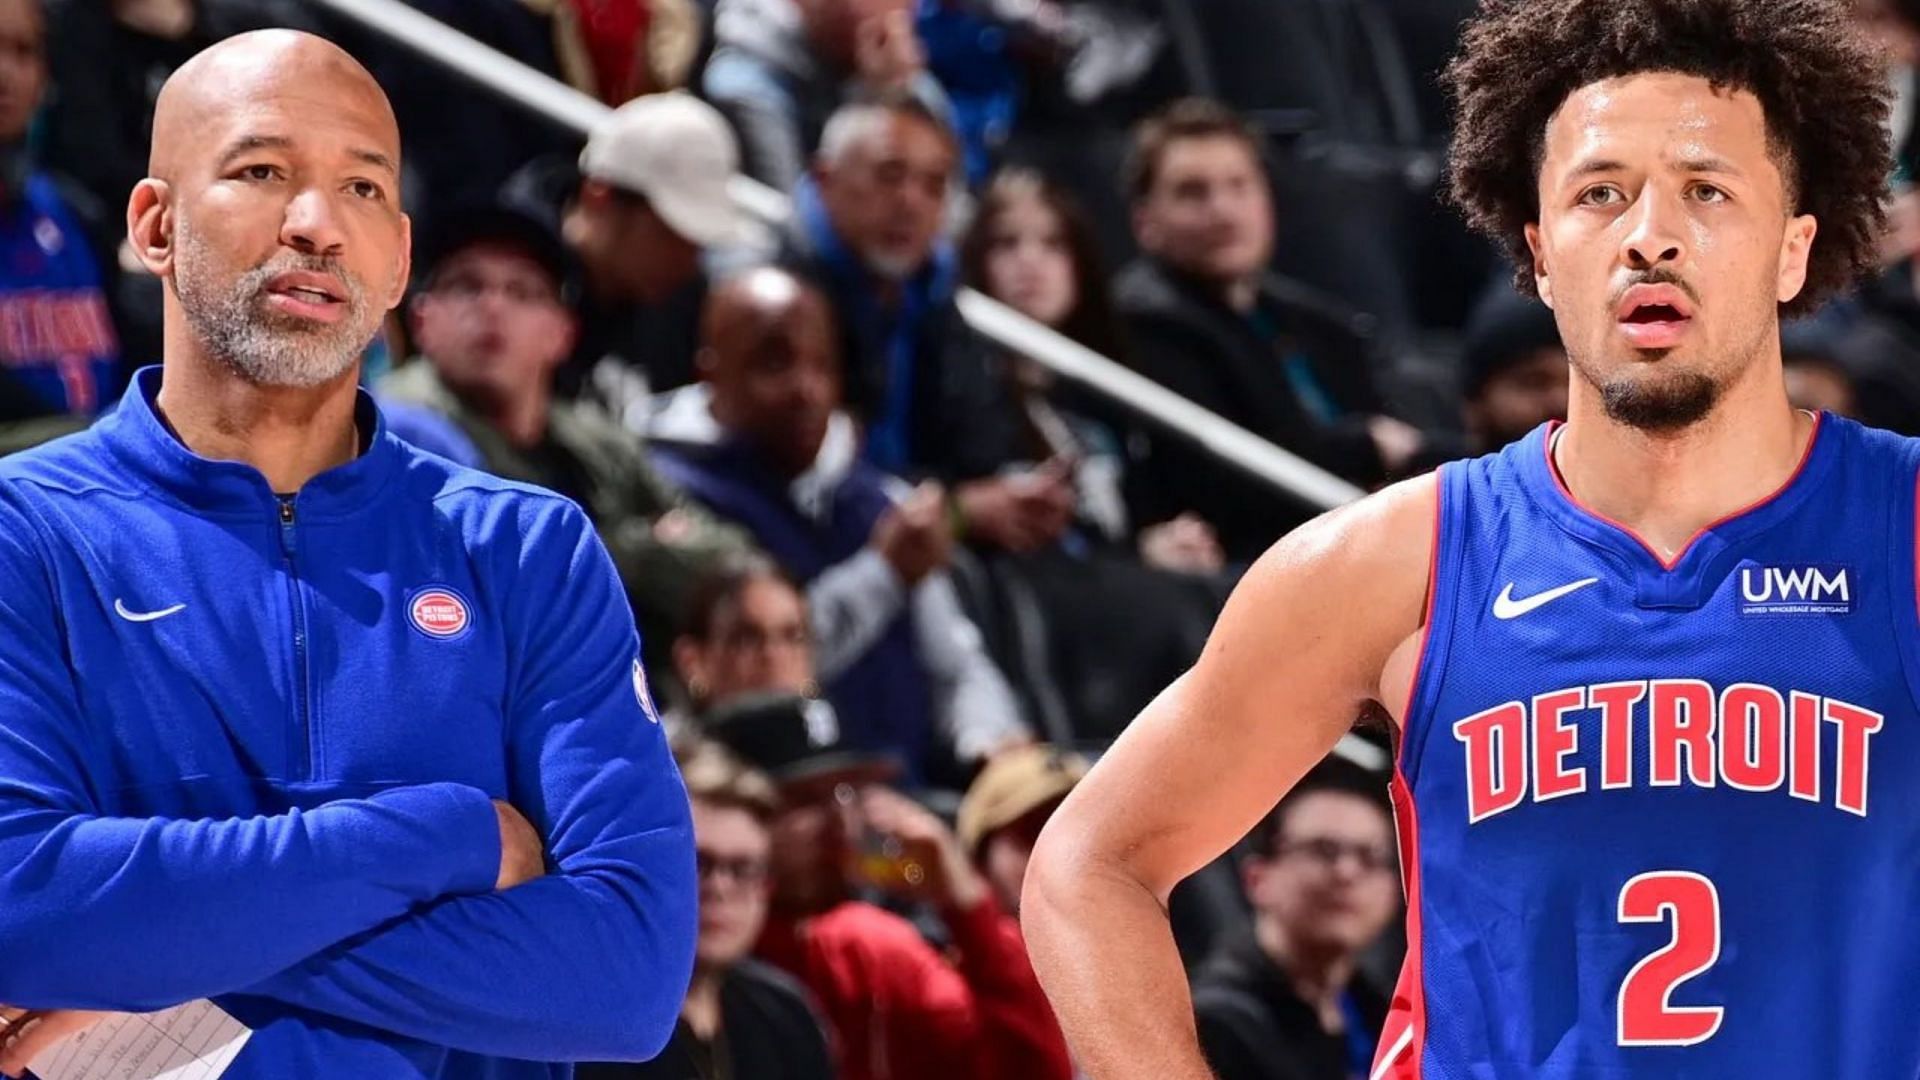 &quot;Stage 1: Denial&quot; - NBA fans perplexed after Cade Cunningham refuses to accept Pistons